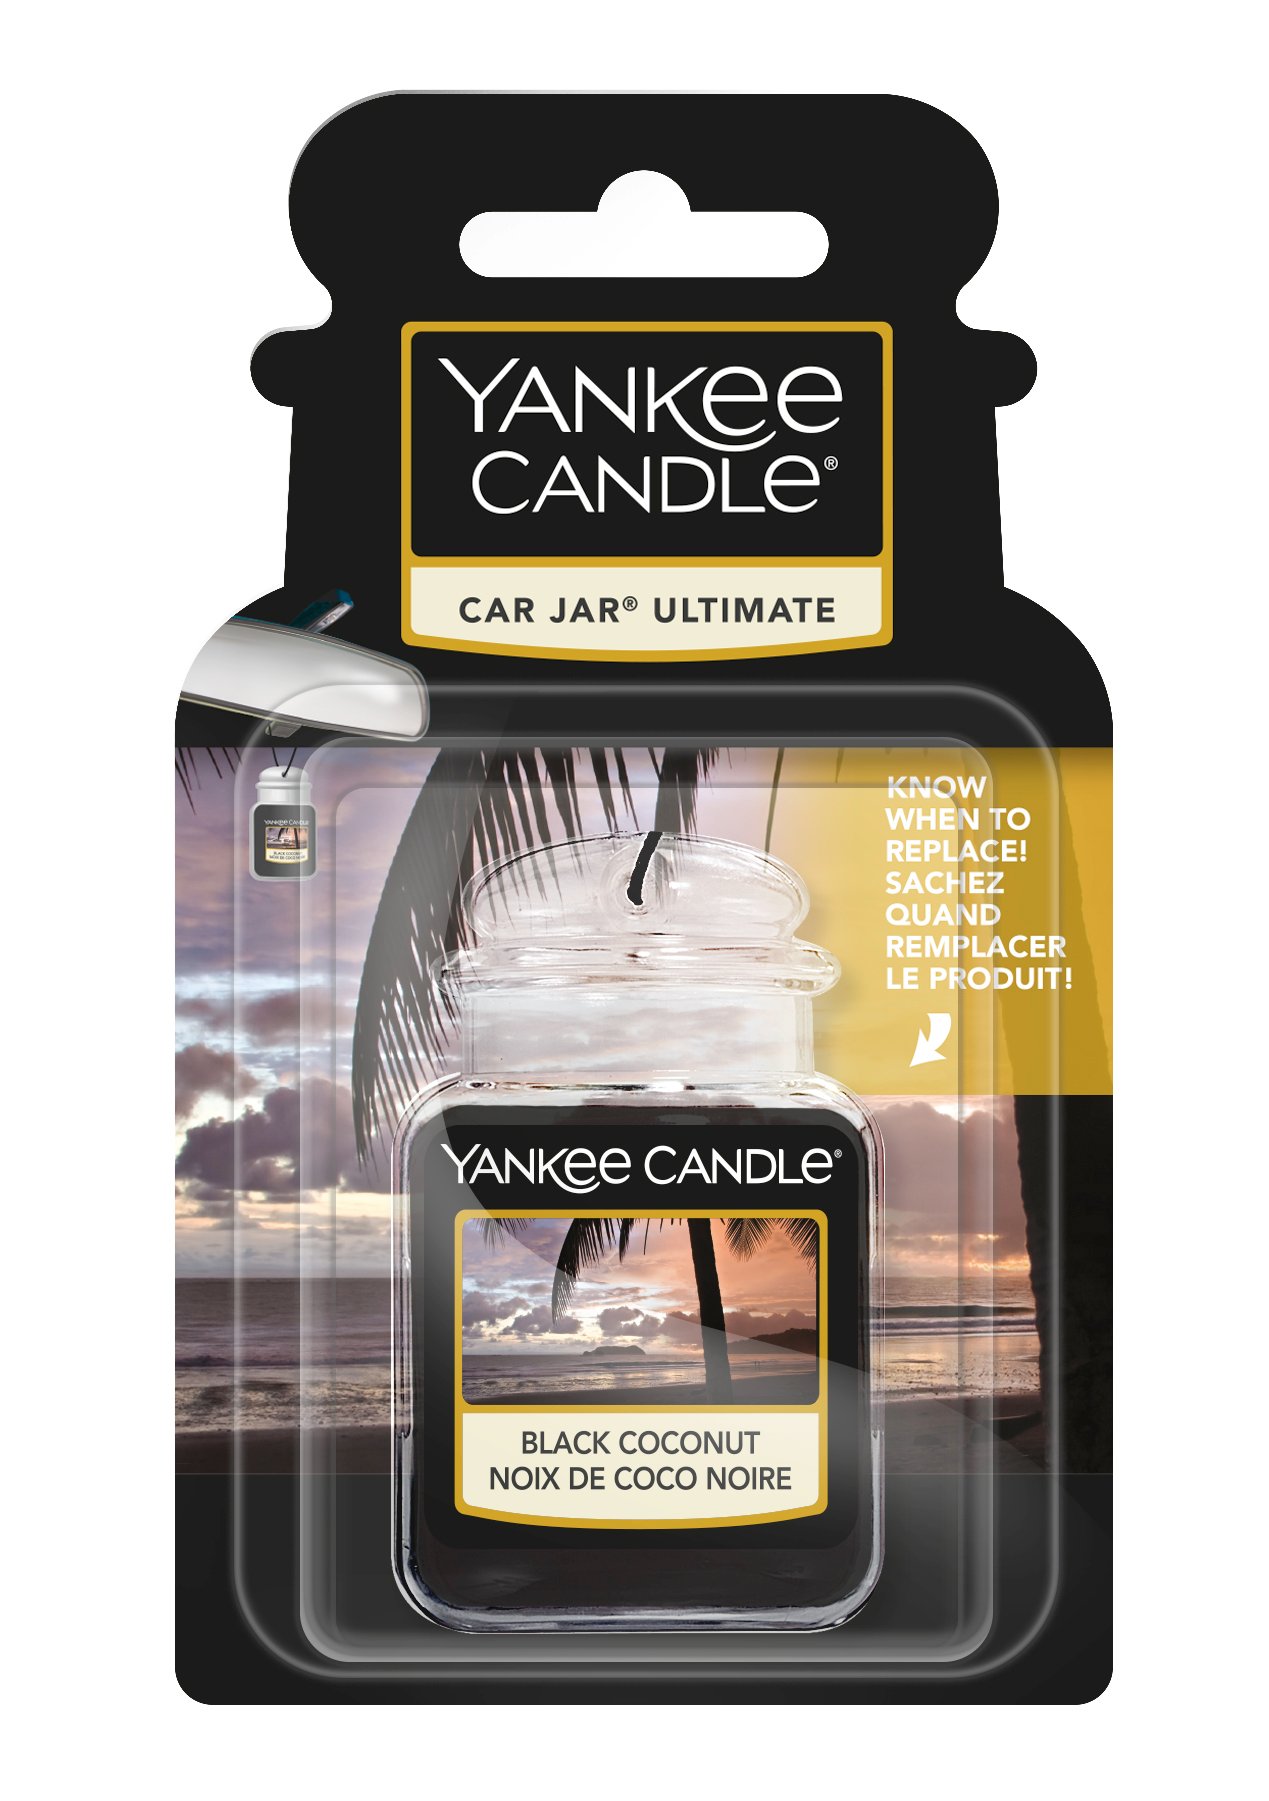 YANKEE CANDLE - Diffuseur pour voiture Ultimate - Vanille & citron